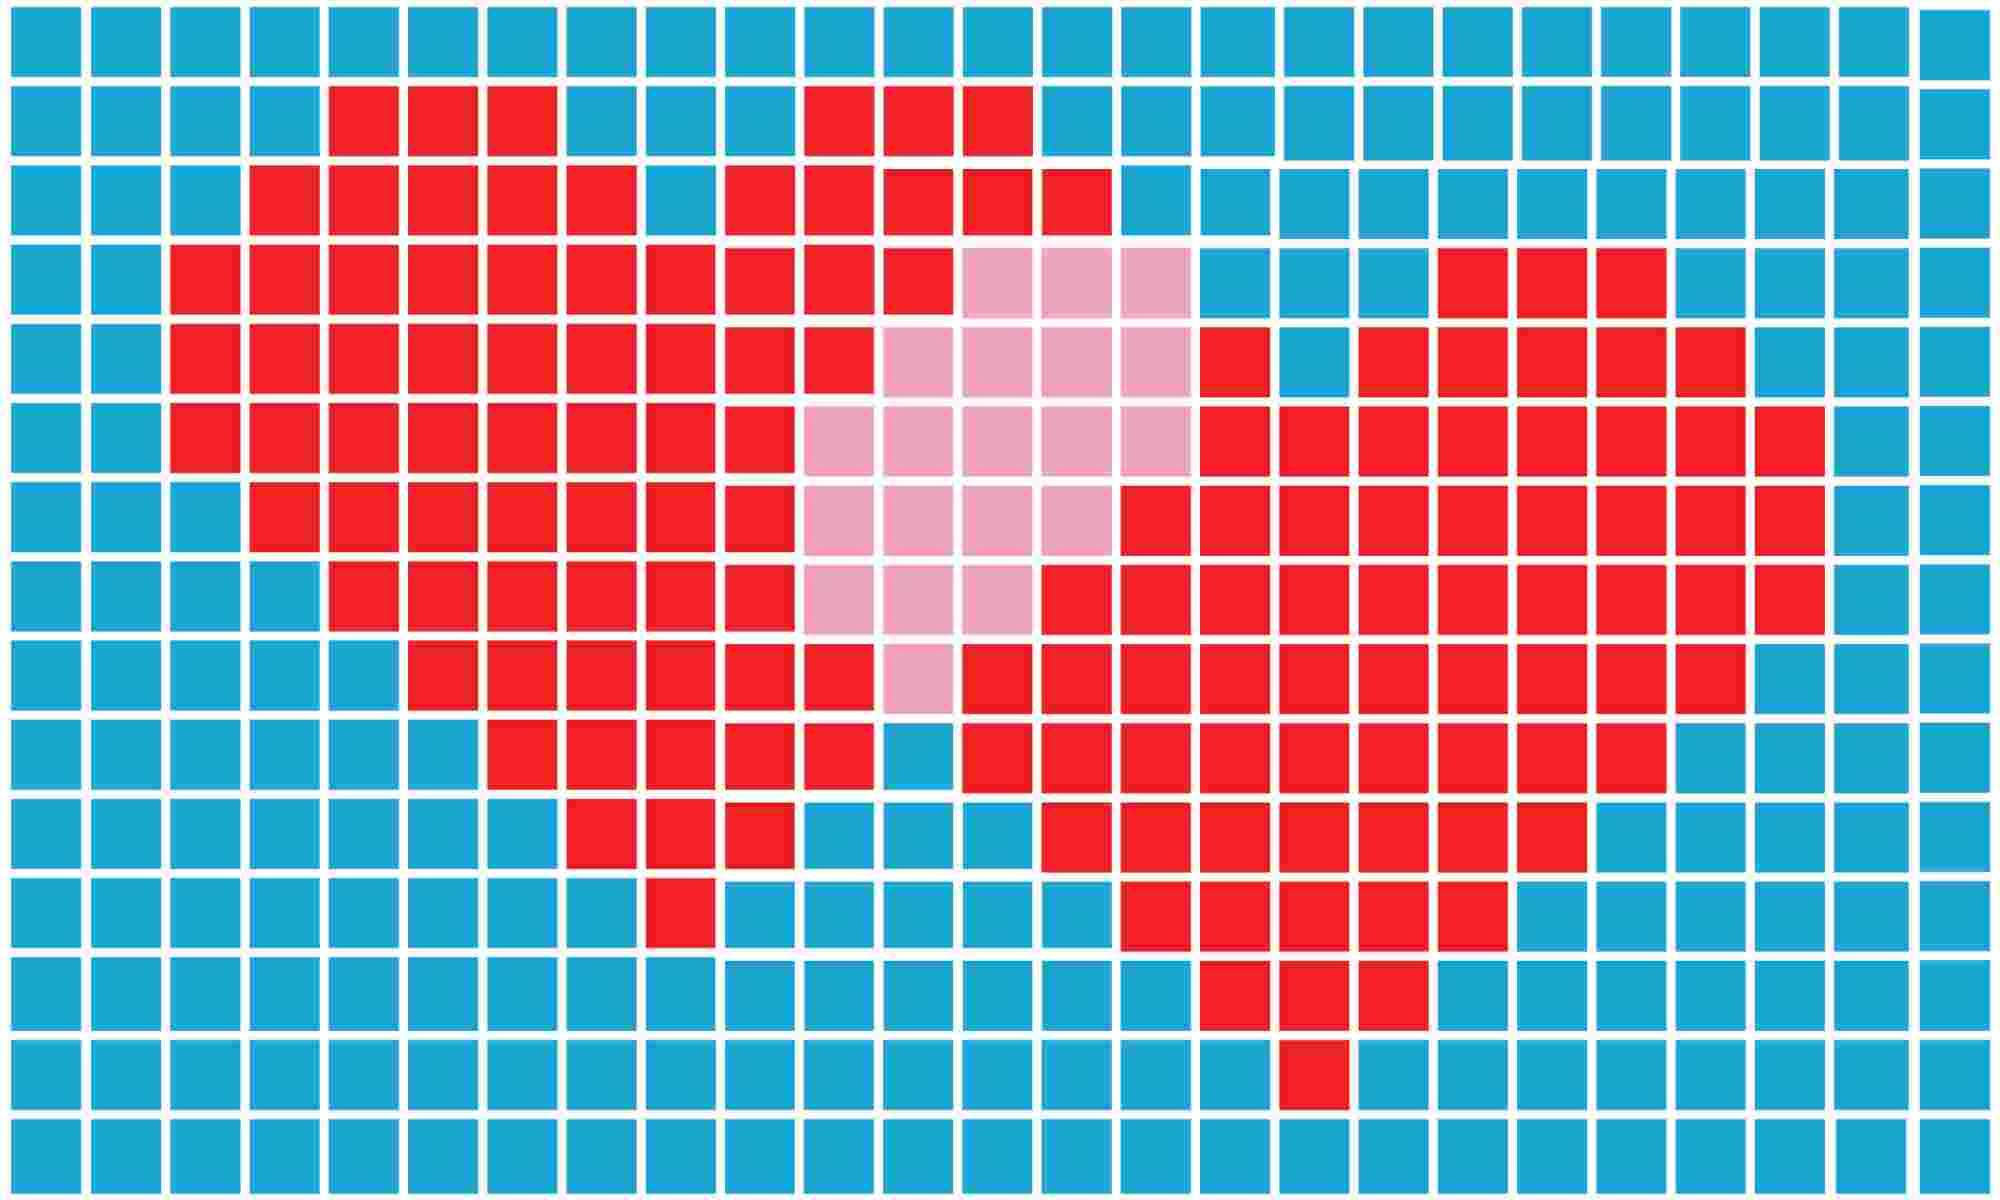 Illustration of online dating showing two hearts overlapping in a pixelated grid pattern.